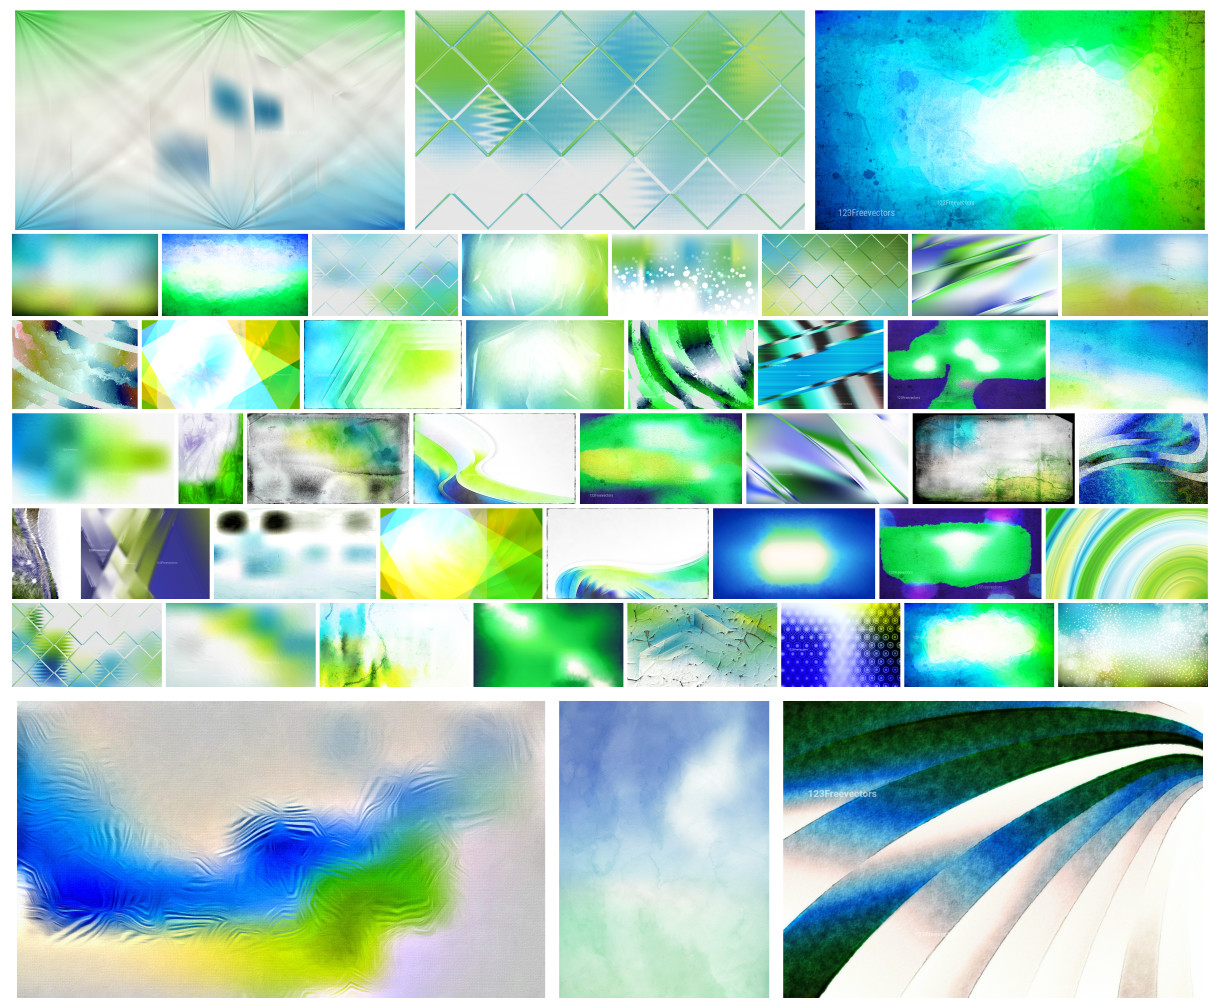 A Creative Collection of Blue Green and White Background Designs